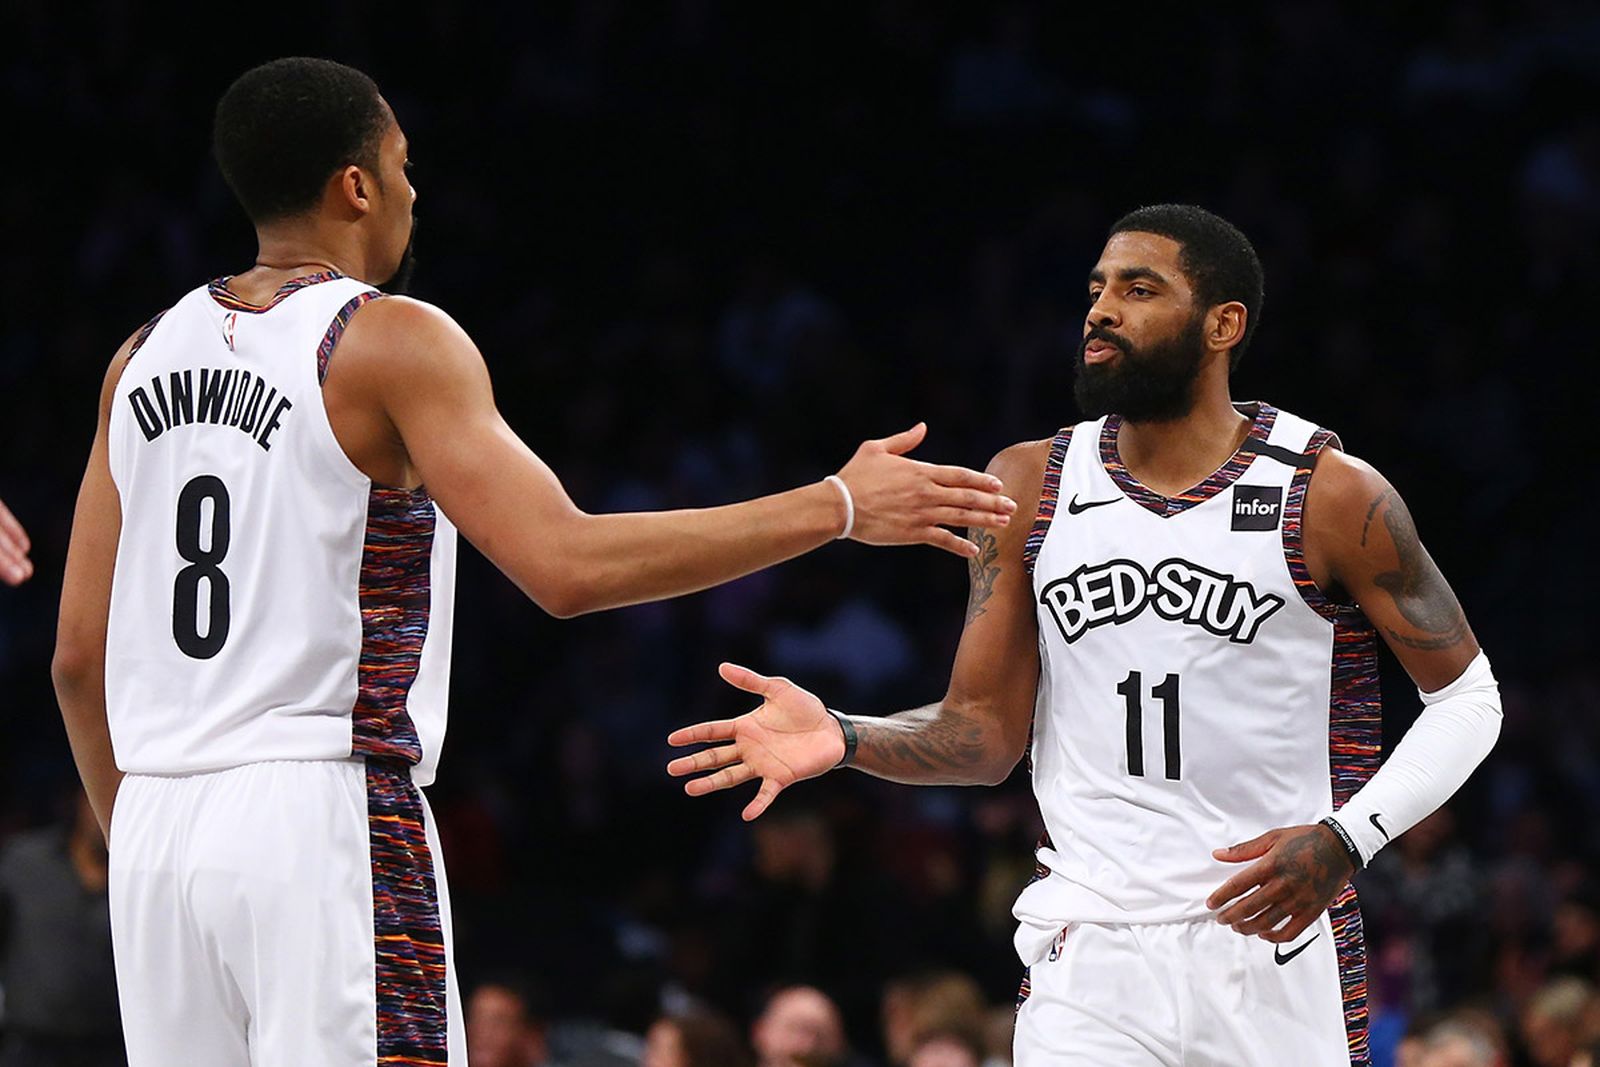 Kyrie Irving #11 of the Brooklyn Nets celebrates with Spencer Dinwiddie #8